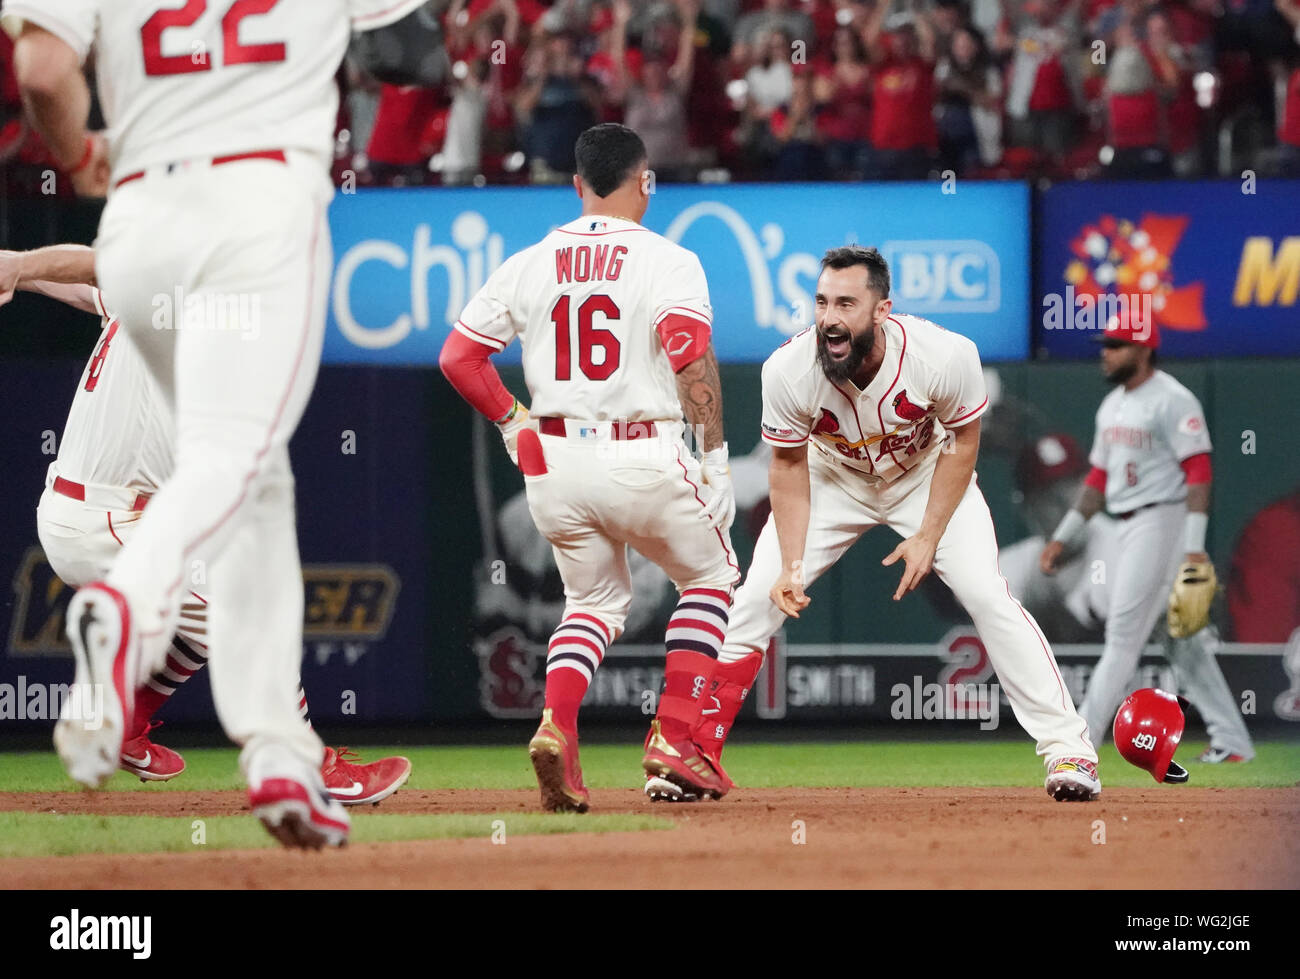 St. Louis Cardinals Matt Carpenter waits for his teammates to run to second base after hitting the game winning single in the ninth inning against the Cincinnati Reds in game 2 of their double header at Busch Stadium in St. Louis on Saturday, August 31, 2019. St. Louis won the game 3-2.   Photo by Bill Greenblatt/UPI Stock Photo